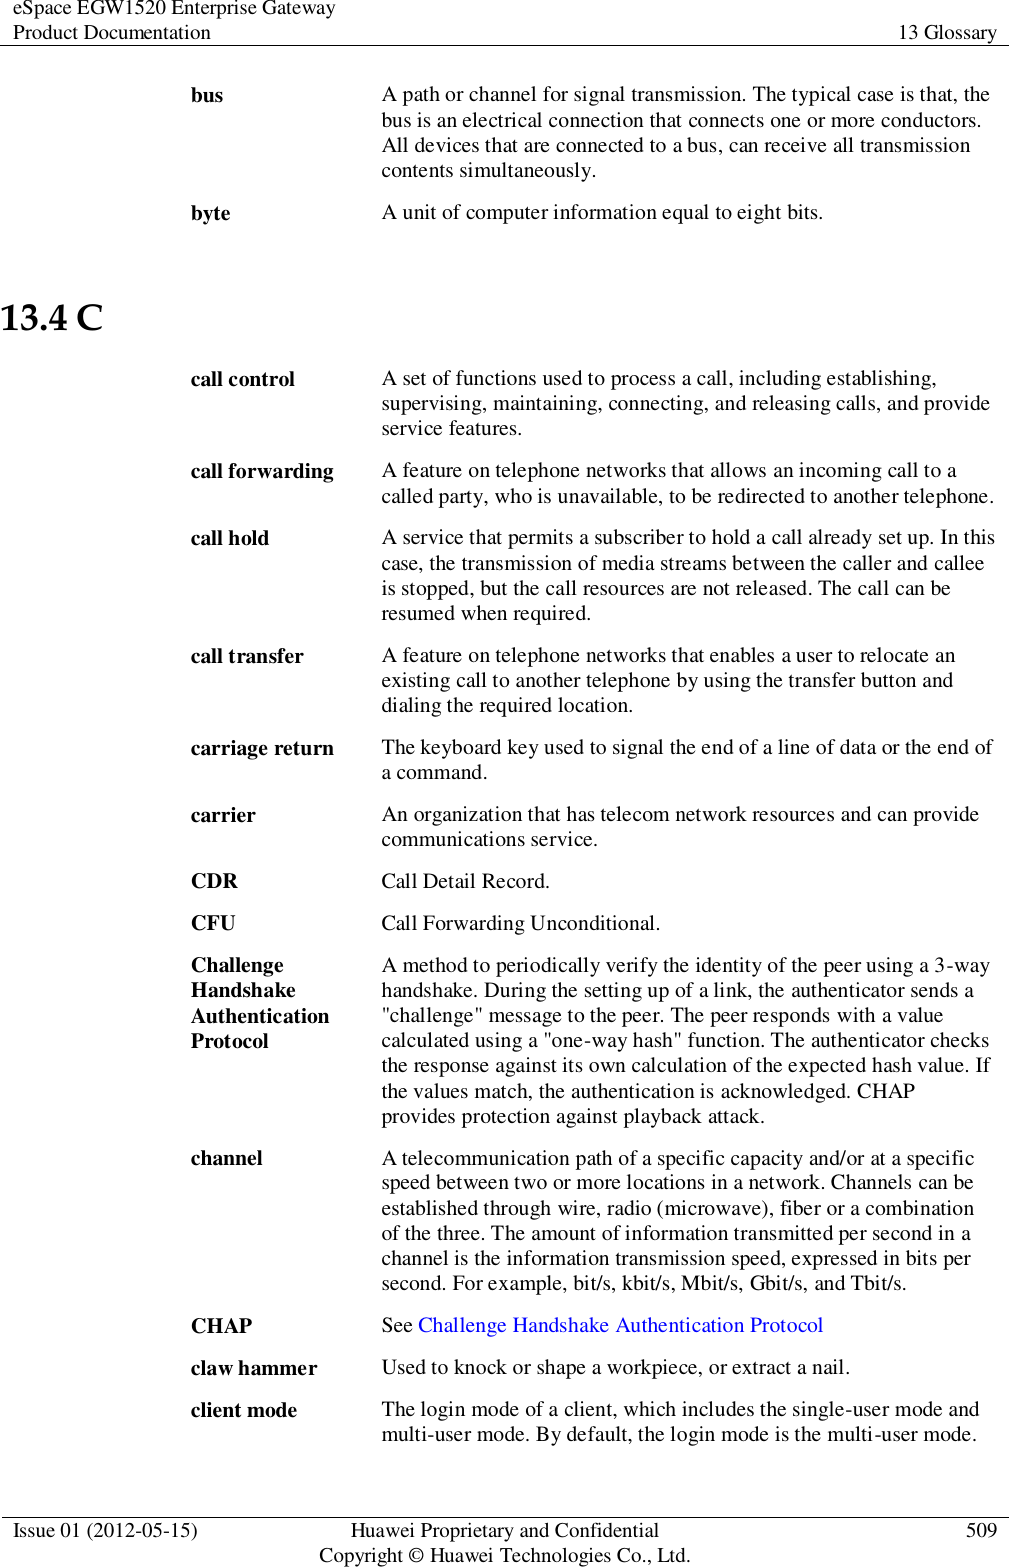 eSpace EGW1520 Enterprise Gateway Product Documentation 13 Glossary  Issue 01 (2012-05-15) Huawei Proprietary and Confidential                                     Copyright © Huawei Technologies Co., Ltd. 509  bus A path or channel for signal transmission. The typical case is that, the bus is an electrical connection that connects one or more conductors. All devices that are connected to a bus, can receive all transmission contents simultaneously. byte A unit of computer information equal to eight bits. 13.4 C call control A set of functions used to process a call, including establishing, supervising, maintaining, connecting, and releasing calls, and provide service features. call forwarding A feature on telephone networks that allows an incoming call to a called party, who is unavailable, to be redirected to another telephone. call hold A service that permits a subscriber to hold a call already set up. In this case, the transmission of media streams between the caller and callee is stopped, but the call resources are not released. The call can be resumed when required. call transfer A feature on telephone networks that enables a user to relocate an existing call to another telephone by using the transfer button and dialing the required location. carriage return The keyboard key used to signal the end of a line of data or the end of a command. carrier An organization that has telecom network resources and can provide communications service. CDR Call Detail Record. CFU Call Forwarding Unconditional. Challenge Handshake Authentication Protocol A method to periodically verify the identity of the peer using a 3-way handshake. During the setting up of a link, the authenticator sends a &quot;challenge&quot; message to the peer. The peer responds with a value calculated using a &quot;one-way hash&quot; function. The authenticator checks the response against its own calculation of the expected hash value. If the values match, the authentication is acknowledged. CHAP provides protection against playback attack. channel A telecommunication path of a specific capacity and/or at a specific speed between two or more locations in a network. Channels can be established through wire, radio (microwave), fiber or a combination of the three. The amount of information transmitted per second in a channel is the information transmission speed, expressed in bits per second. For example, bit/s, kbit/s, Mbit/s, Gbit/s, and Tbit/s. CHAP See Challenge Handshake Authentication Protocol claw hammer Used to knock or shape a workpiece, or extract a nail. client mode The login mode of a client, which includes the single-user mode and multi-user mode. By default, the login mode is the multi-user mode. 